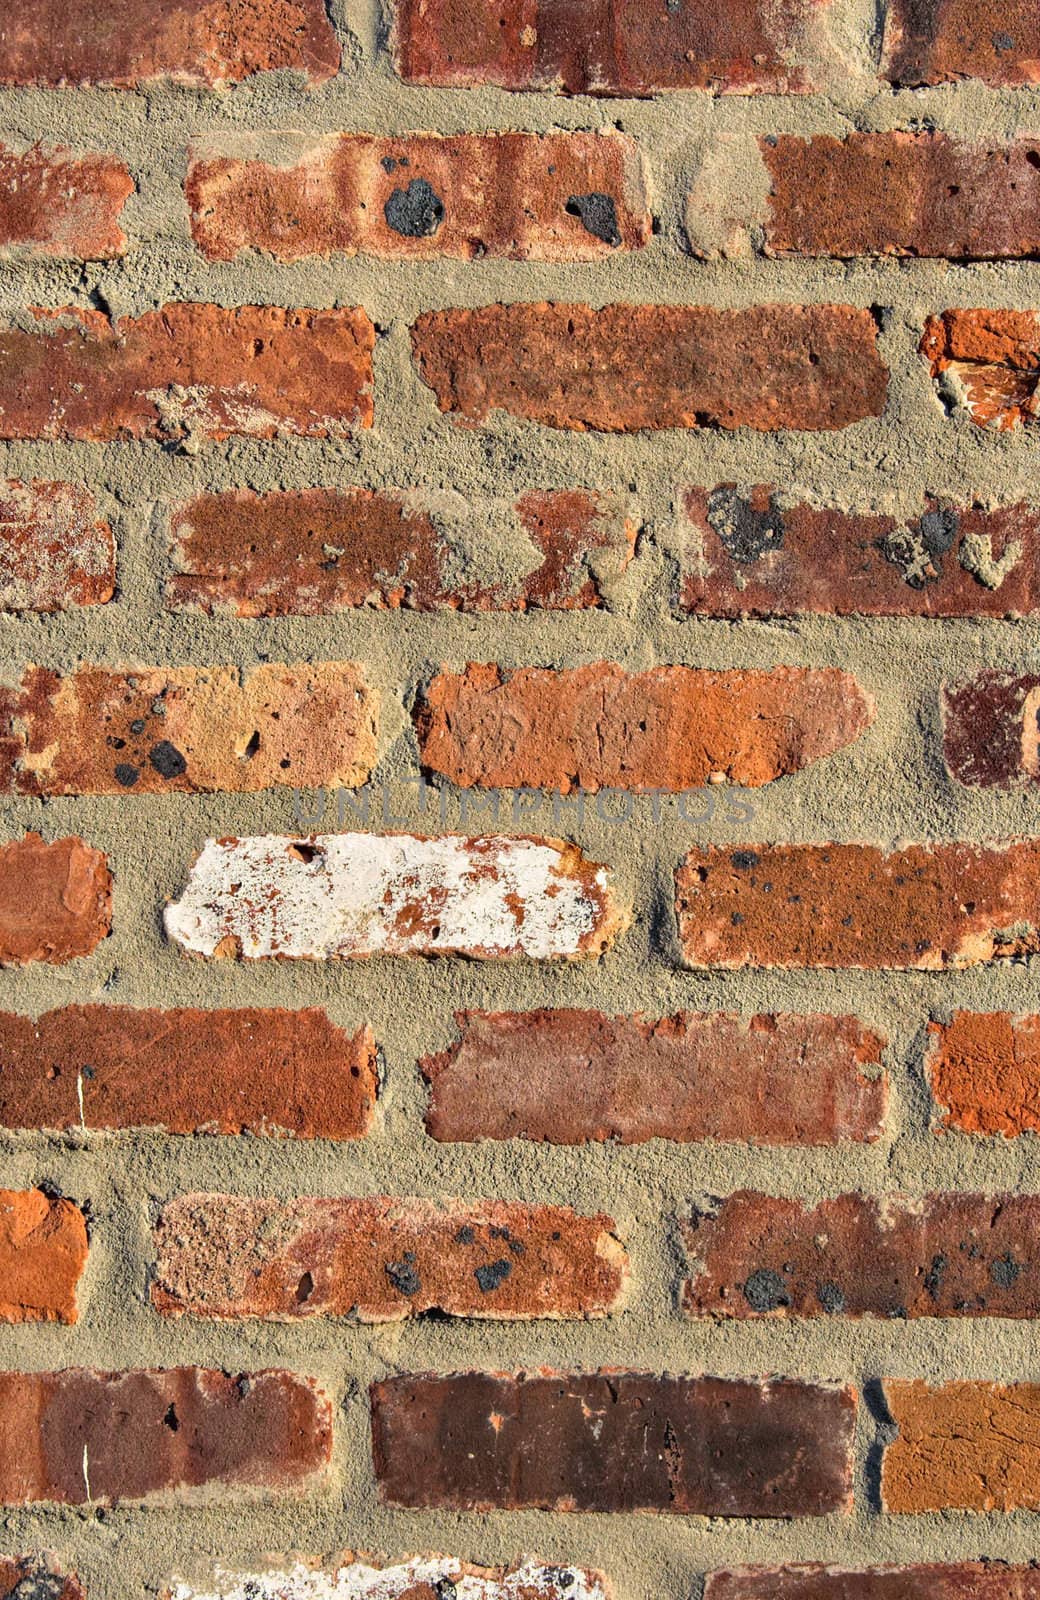 Red brick wall showing detail, patterns, and texture in portrait format